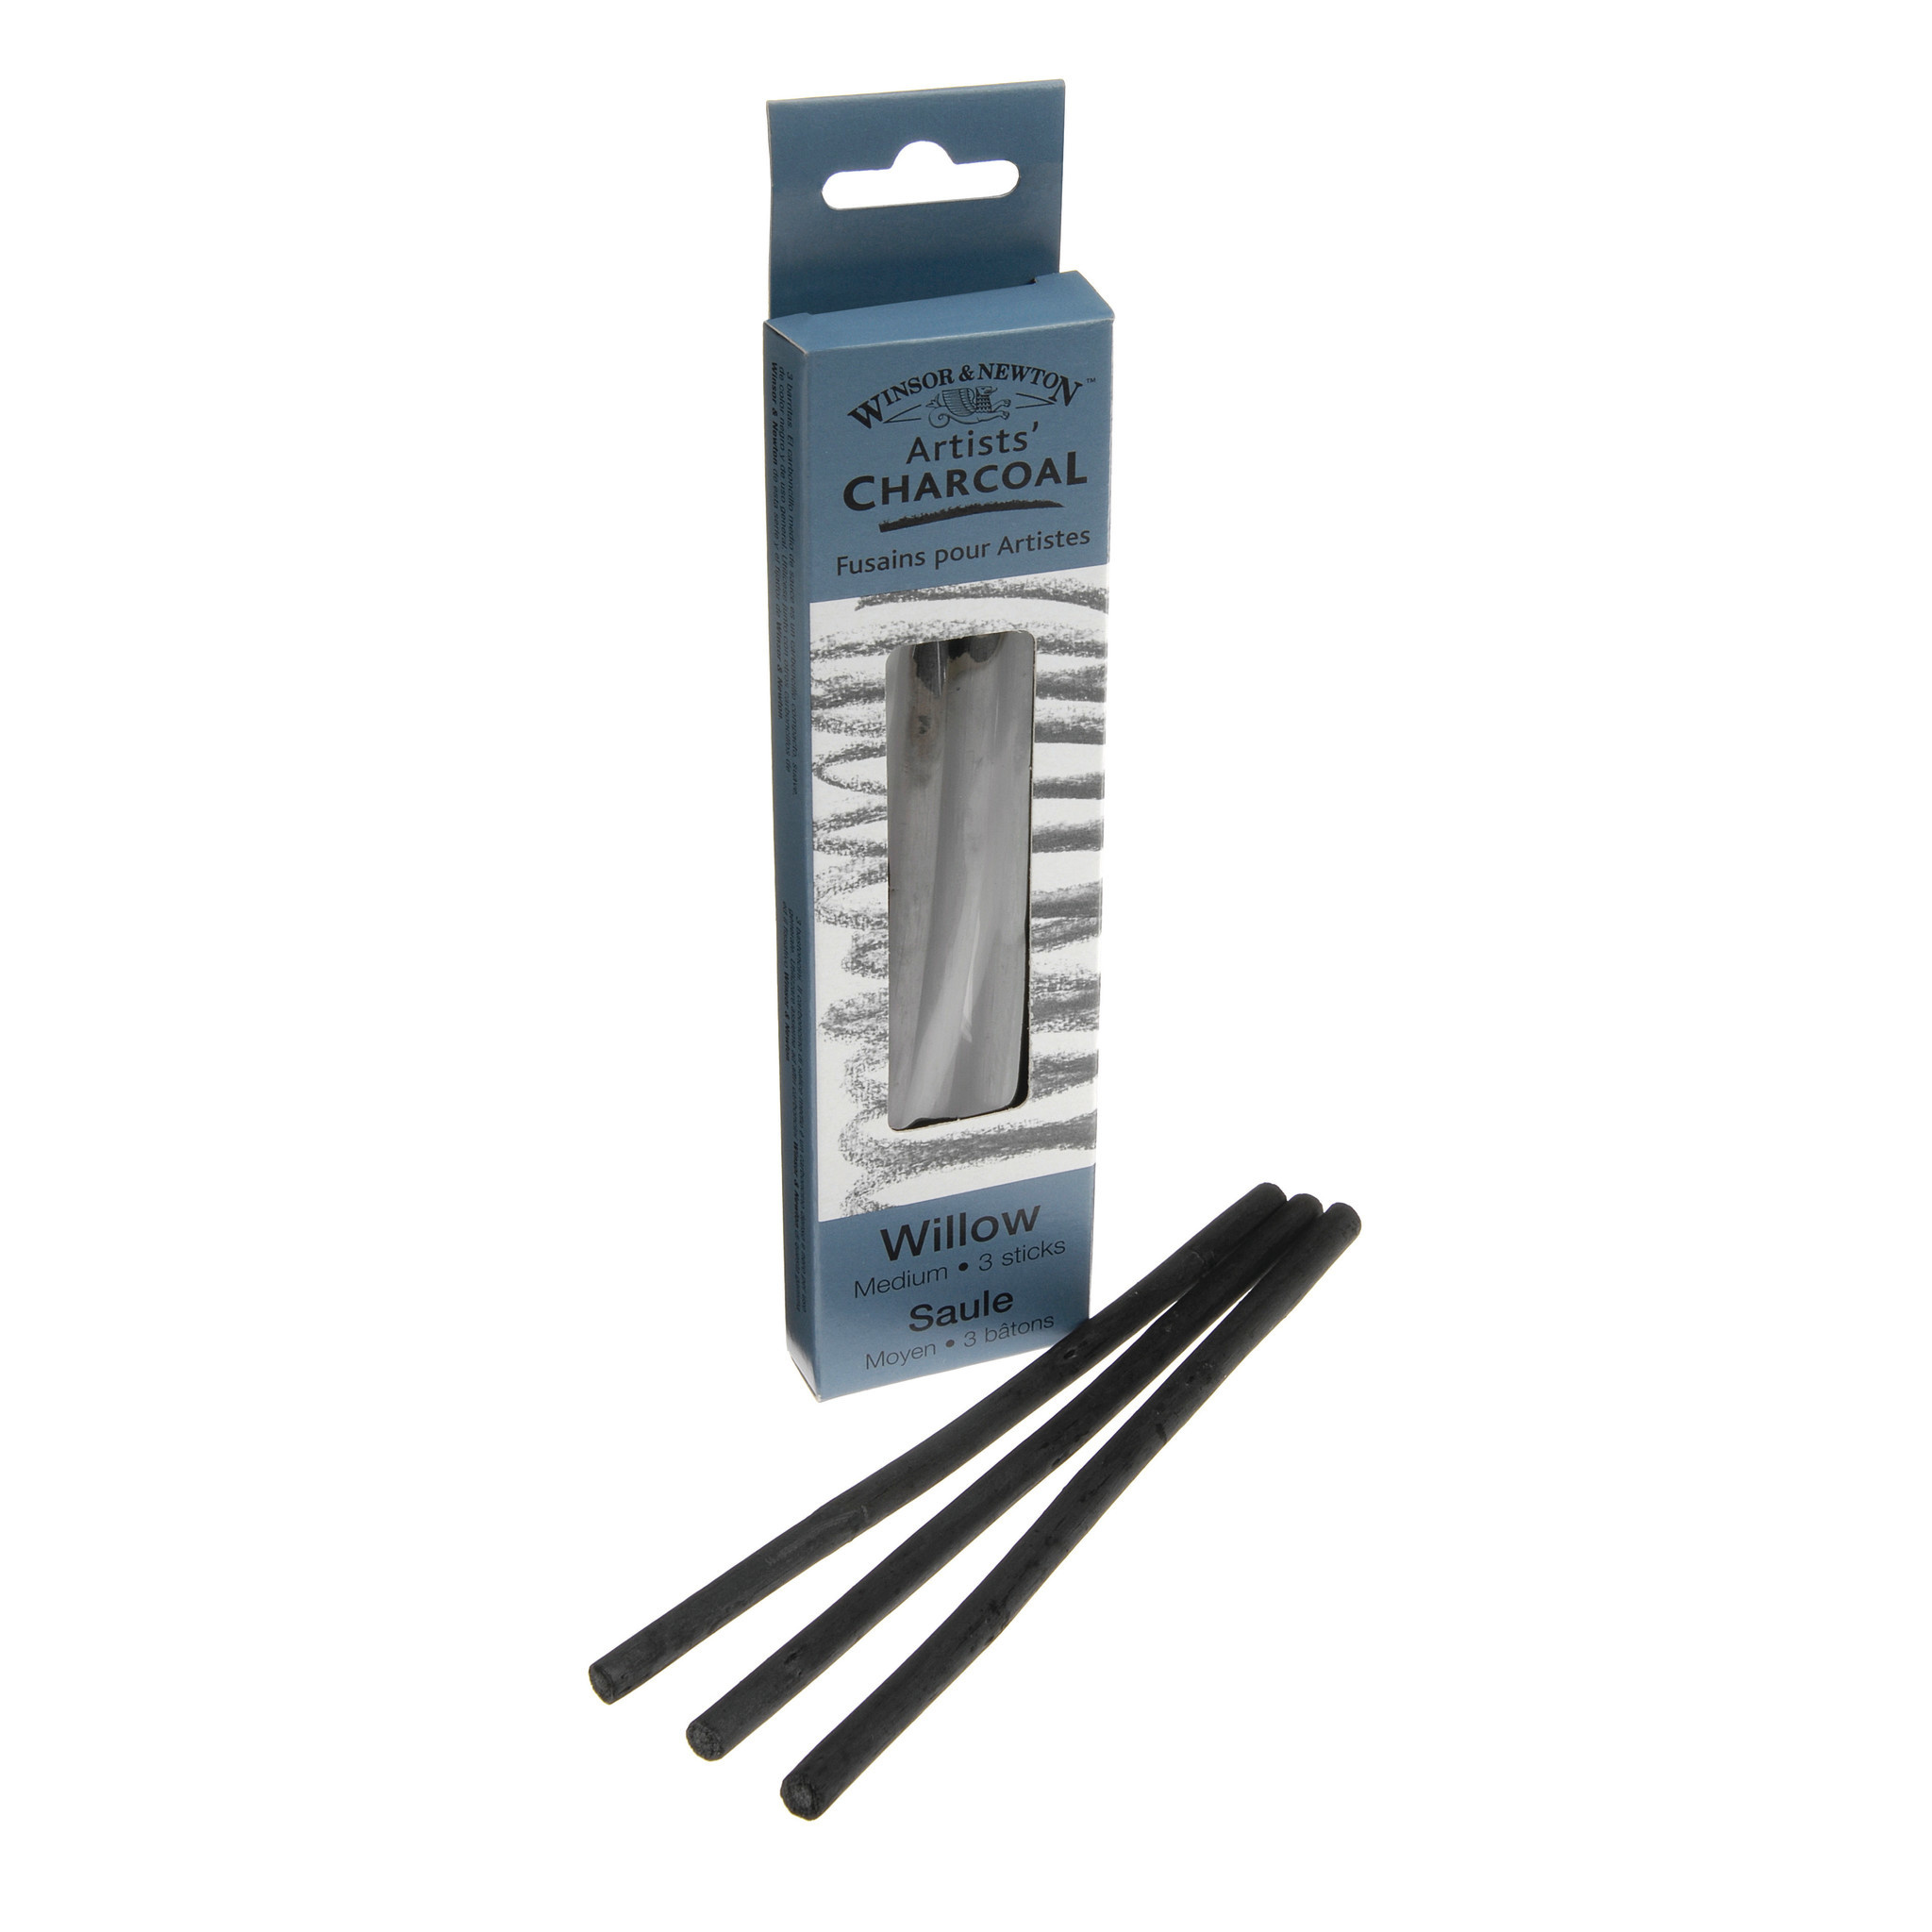 Winsor & Newton Charcoal Sticks, Willow Charcoal - RISD Store